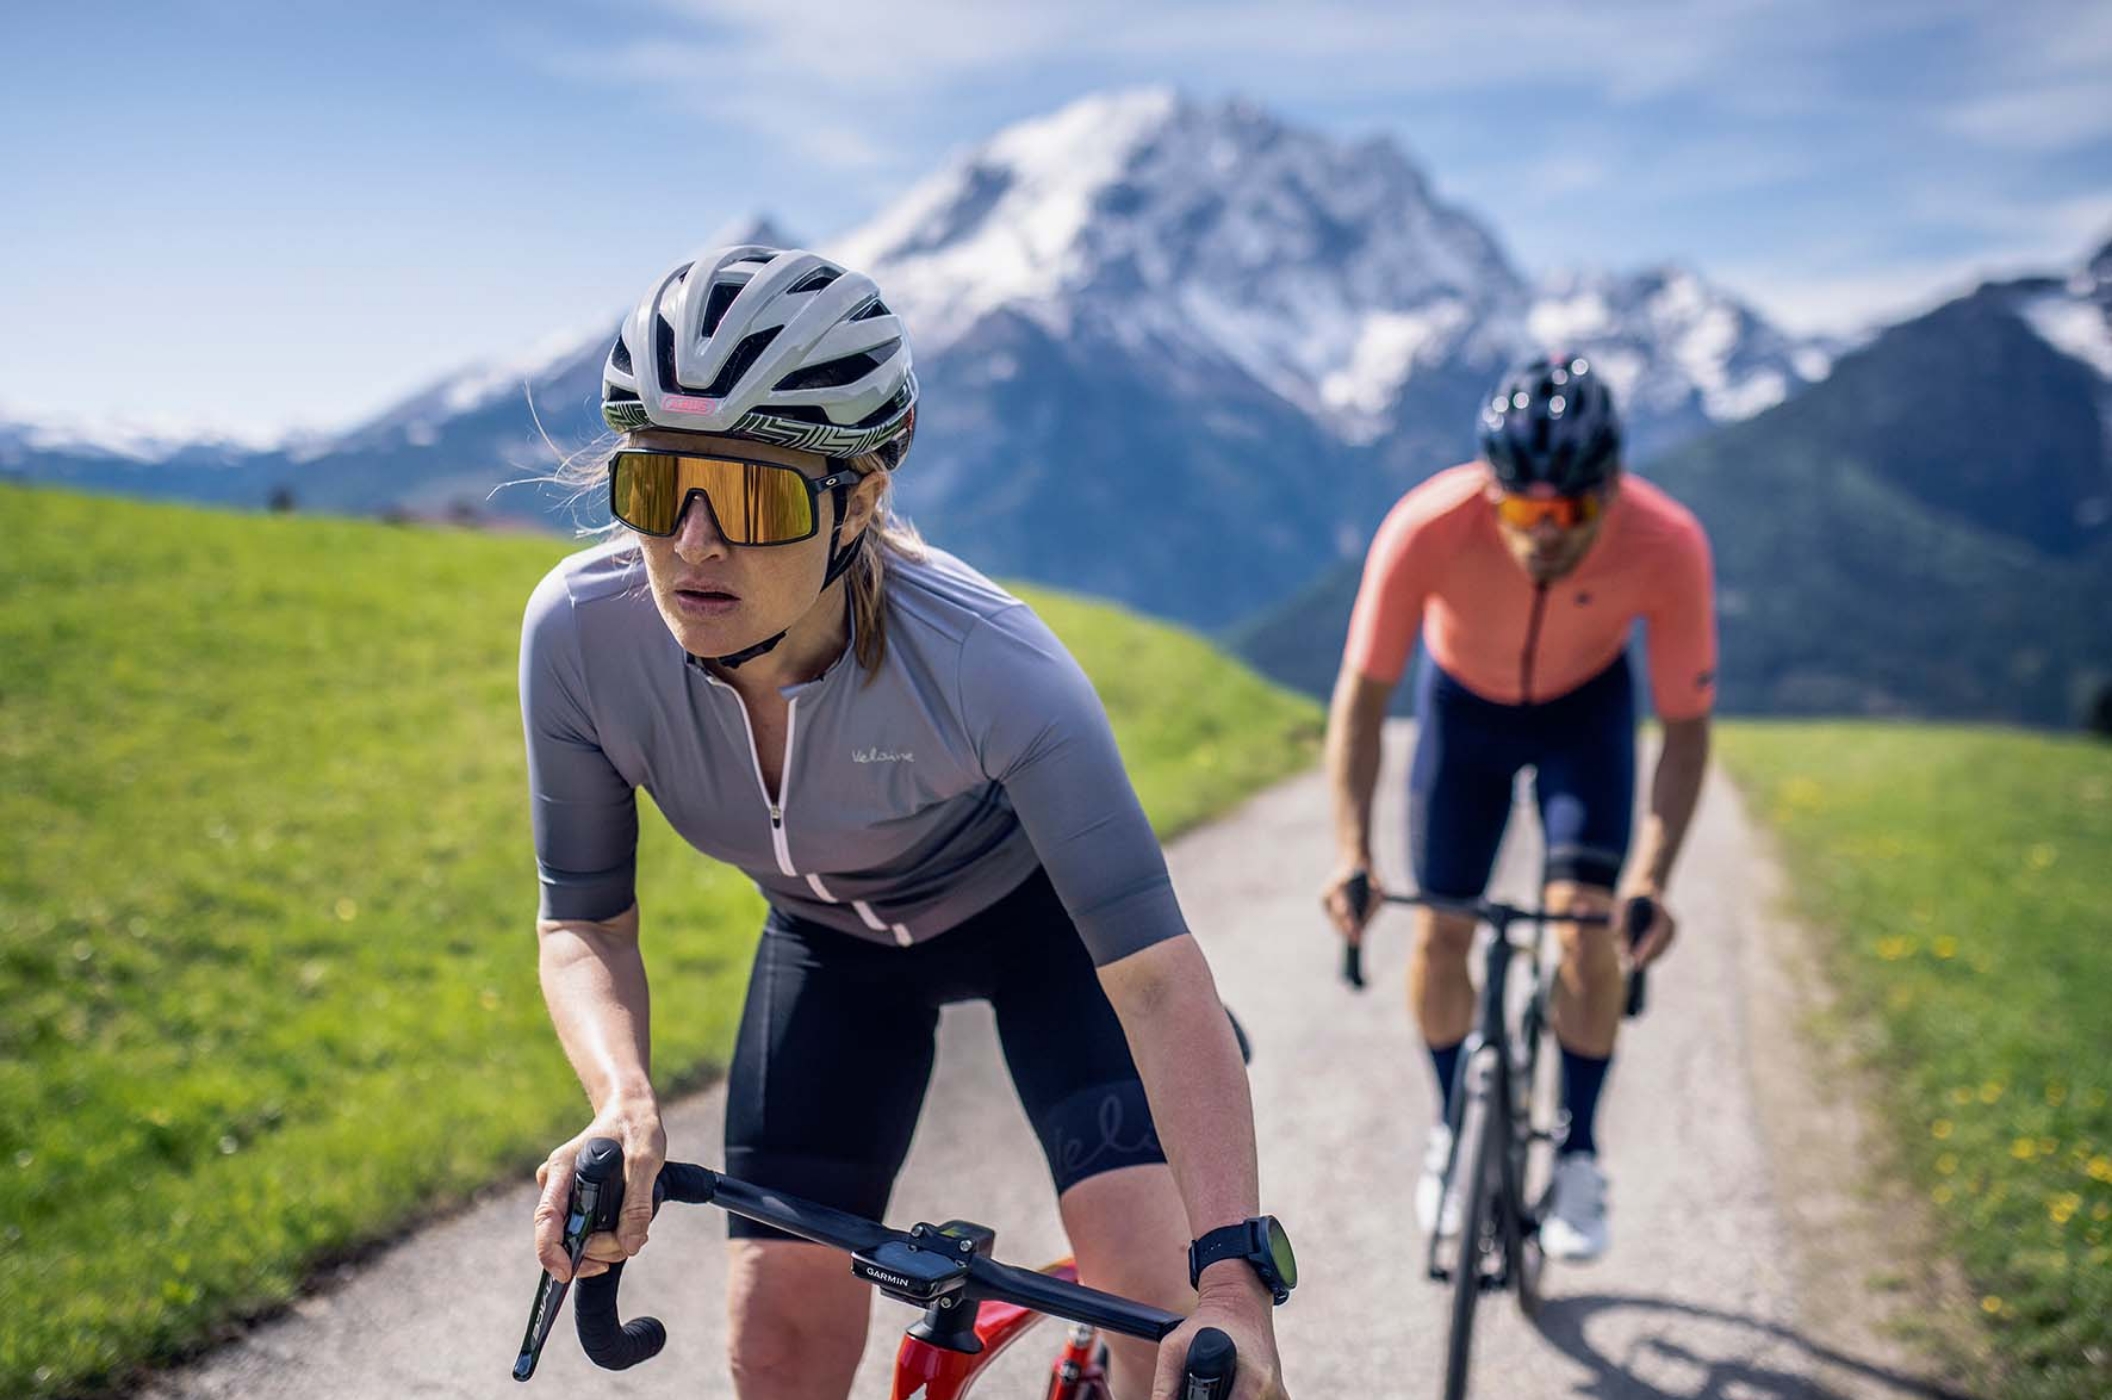 Woman and man on road bikes ride through the mountains and wear ABUS bicycle helmets